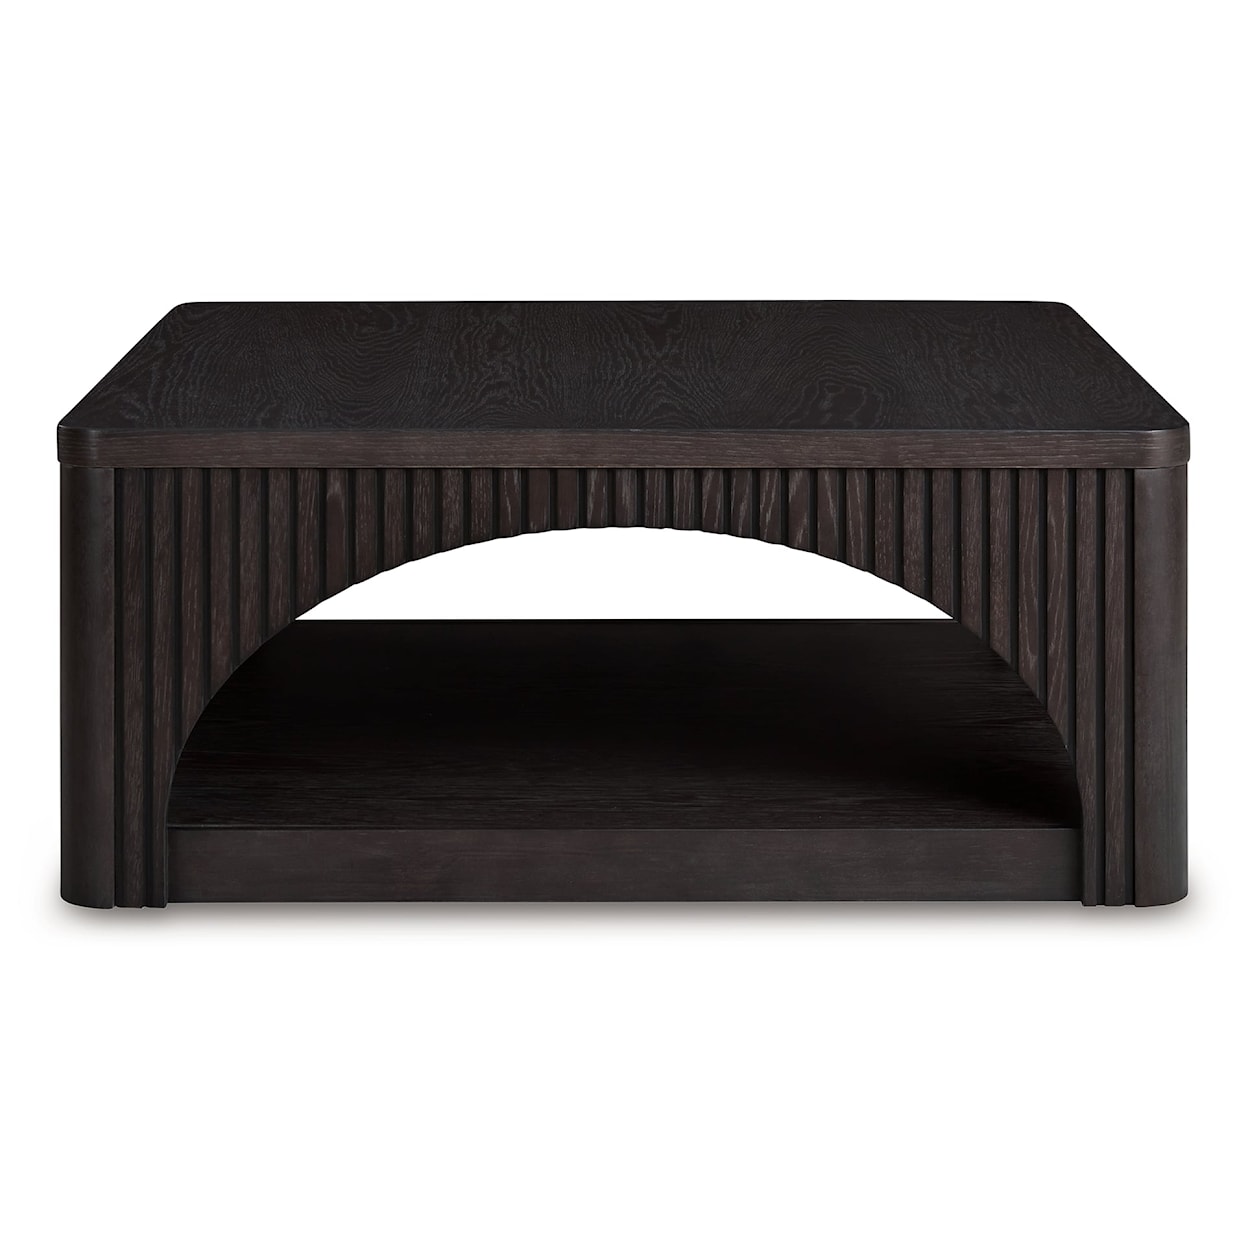 Signature Design by Ashley Yellink Square Coffee Table